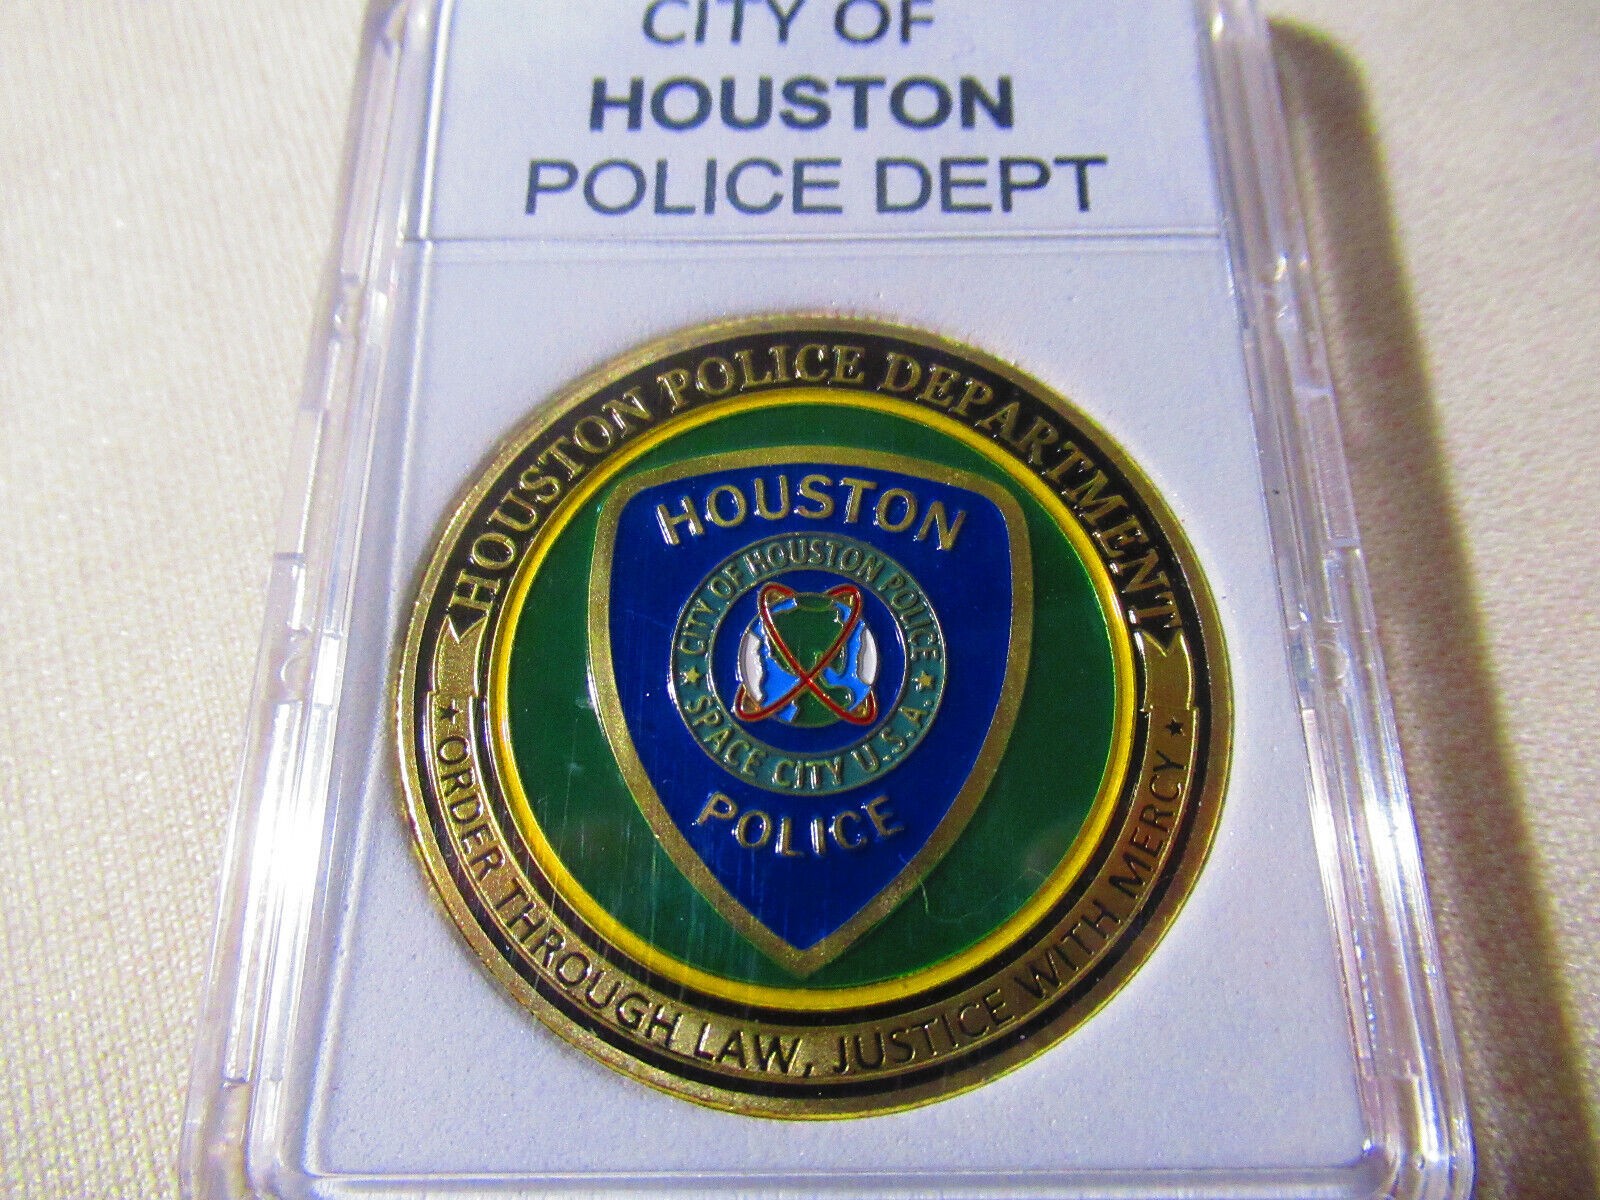 CITY OF HOUSTON Police Dept. Challenge Coin